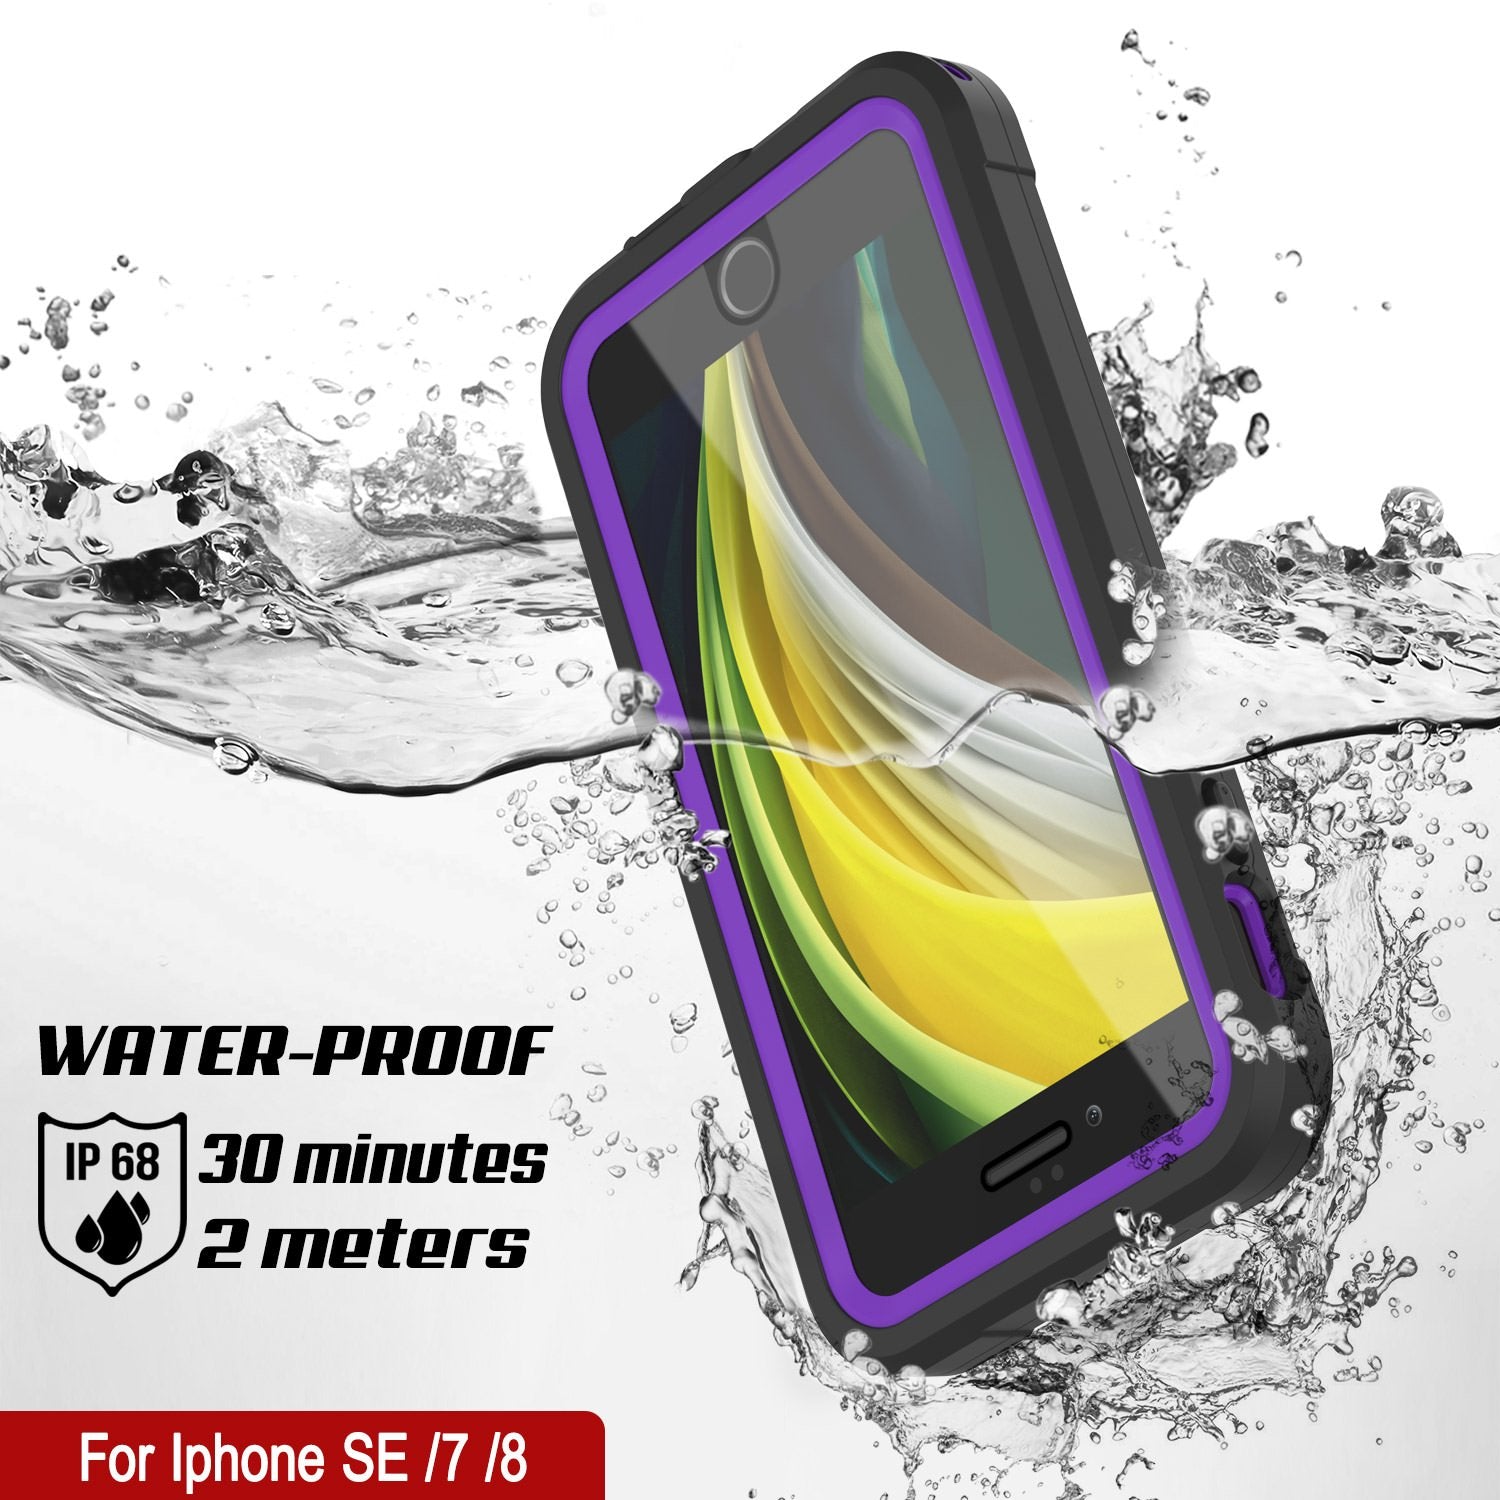 iPhone 8 Waterproof IP68 Case, Punkcase [Purple]  [Maximus Series] [Slim Fit] [IP68 Certified] [Shockresistant] Clear Armor Cover with Screen Protector | Ultimate Protection